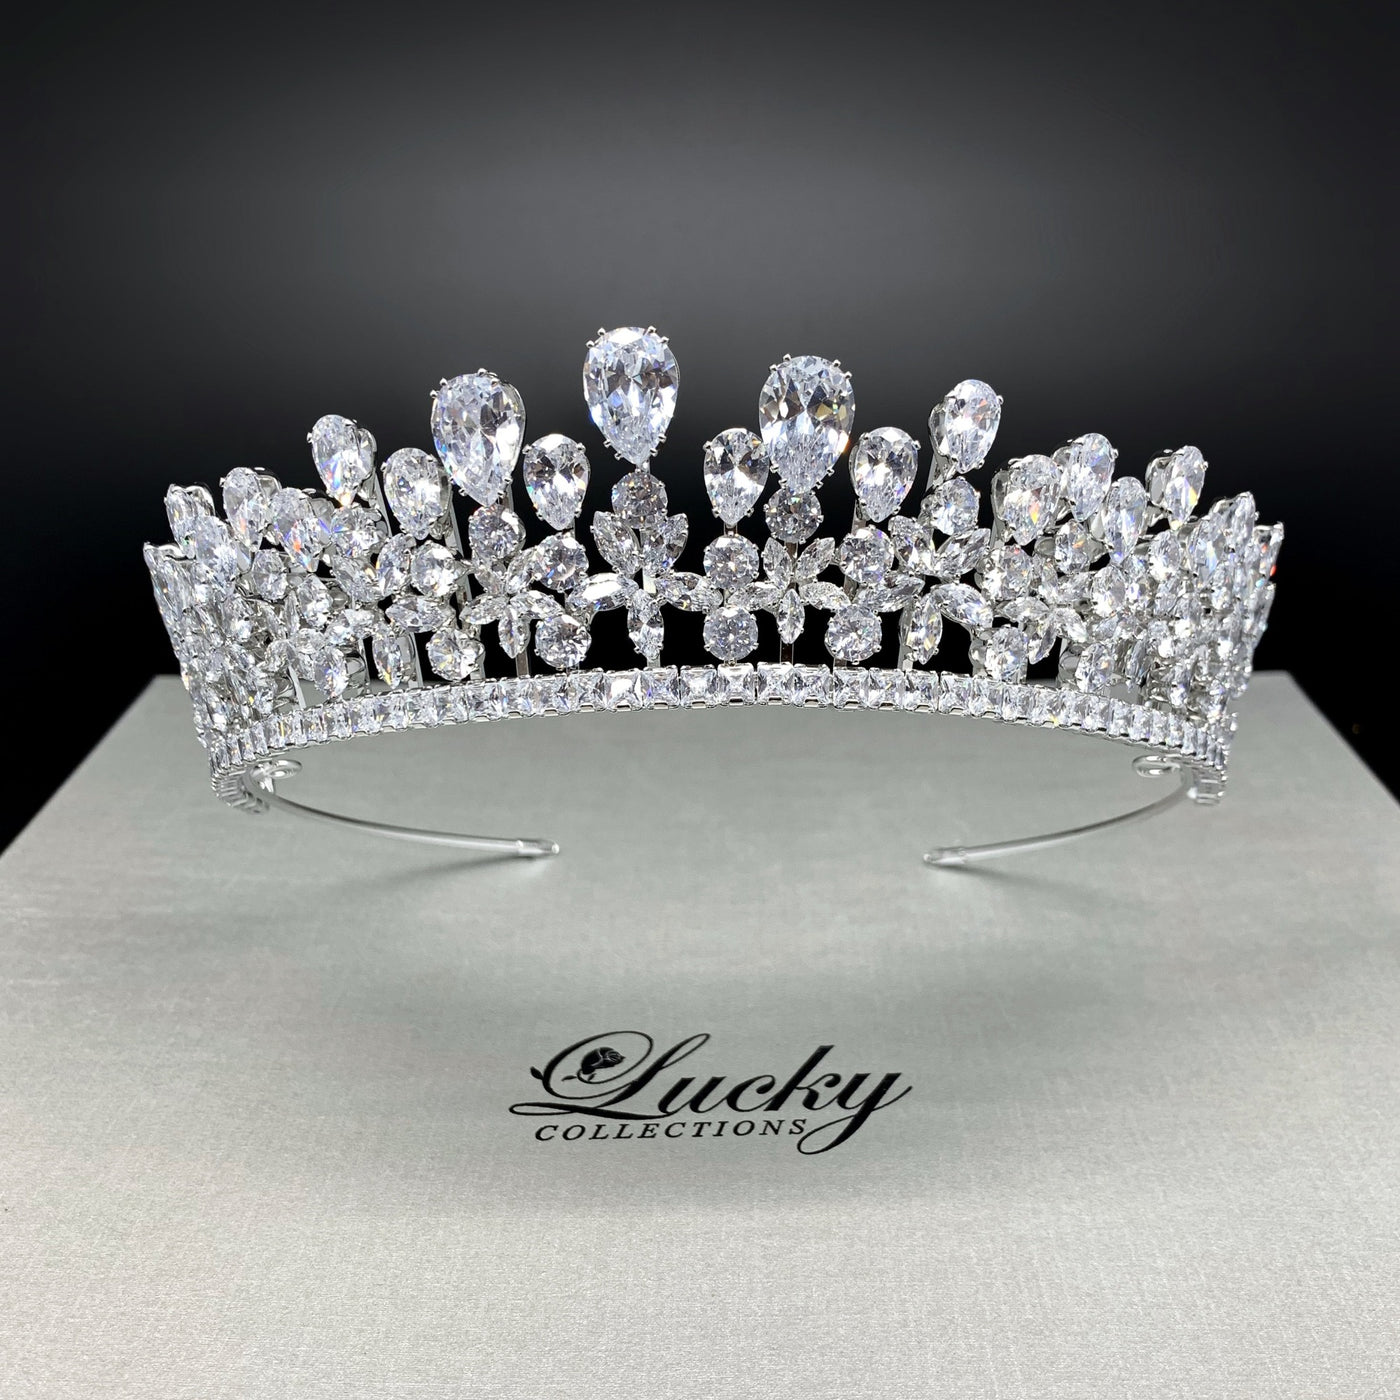 Tiara, Zirconia, 1.5 Inch Central Height, Perfect Pop of Sparkle by Lucky Collections ™. Corona